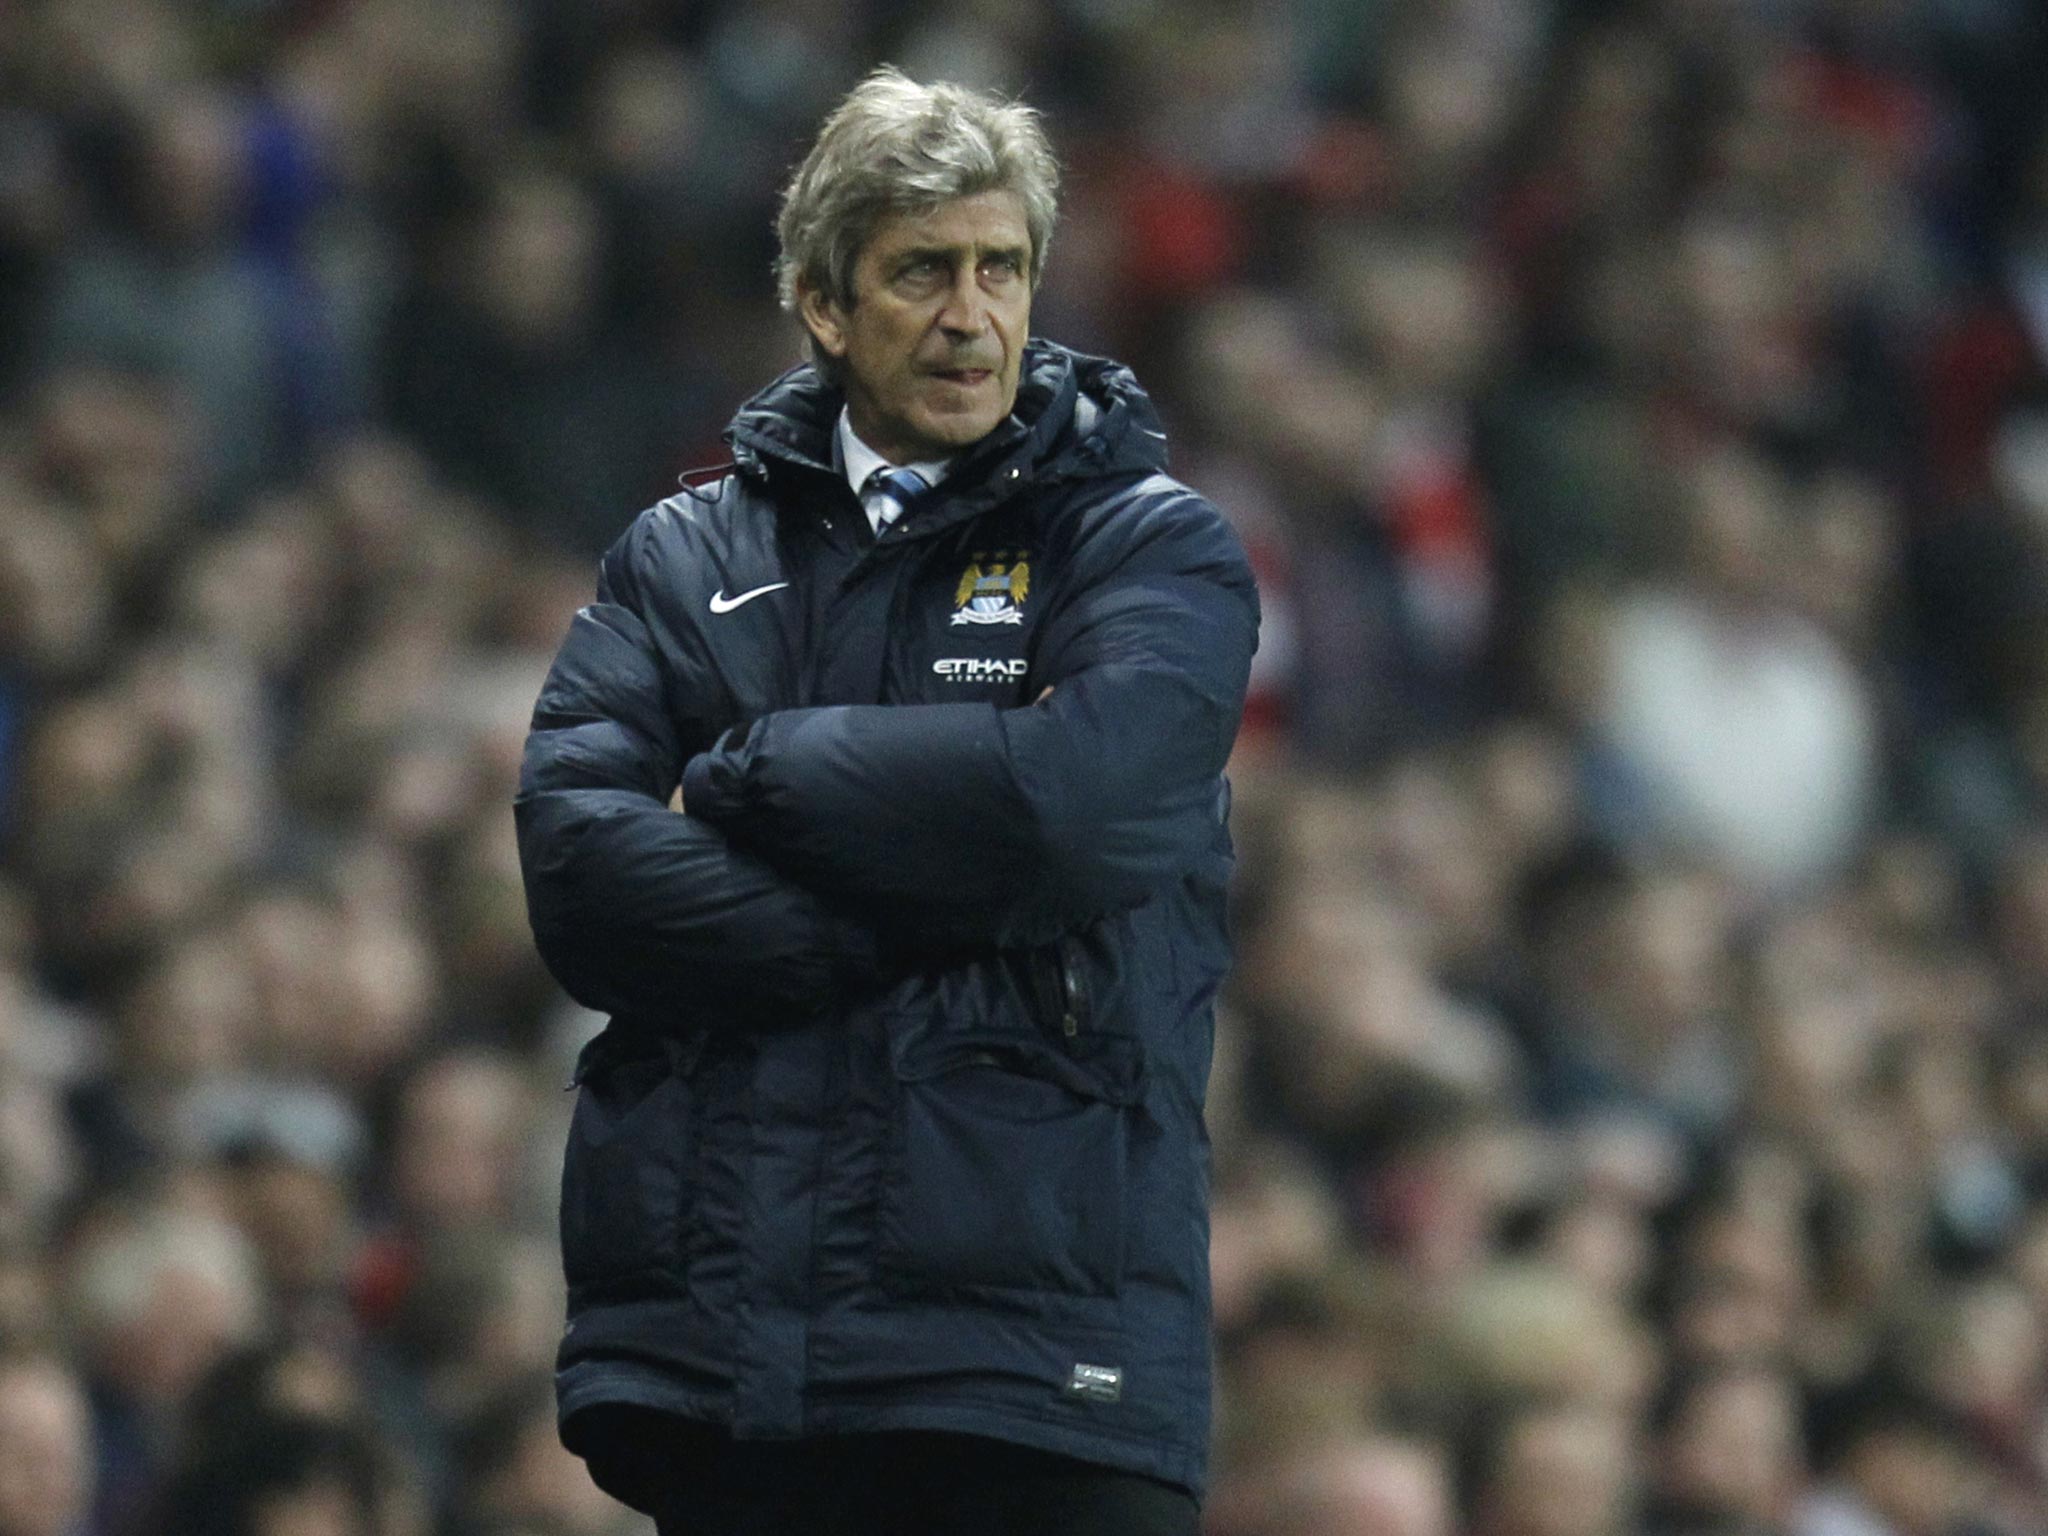 Manuel Pellegrini has a reputation of being fair and honest with his players and that has won him respect